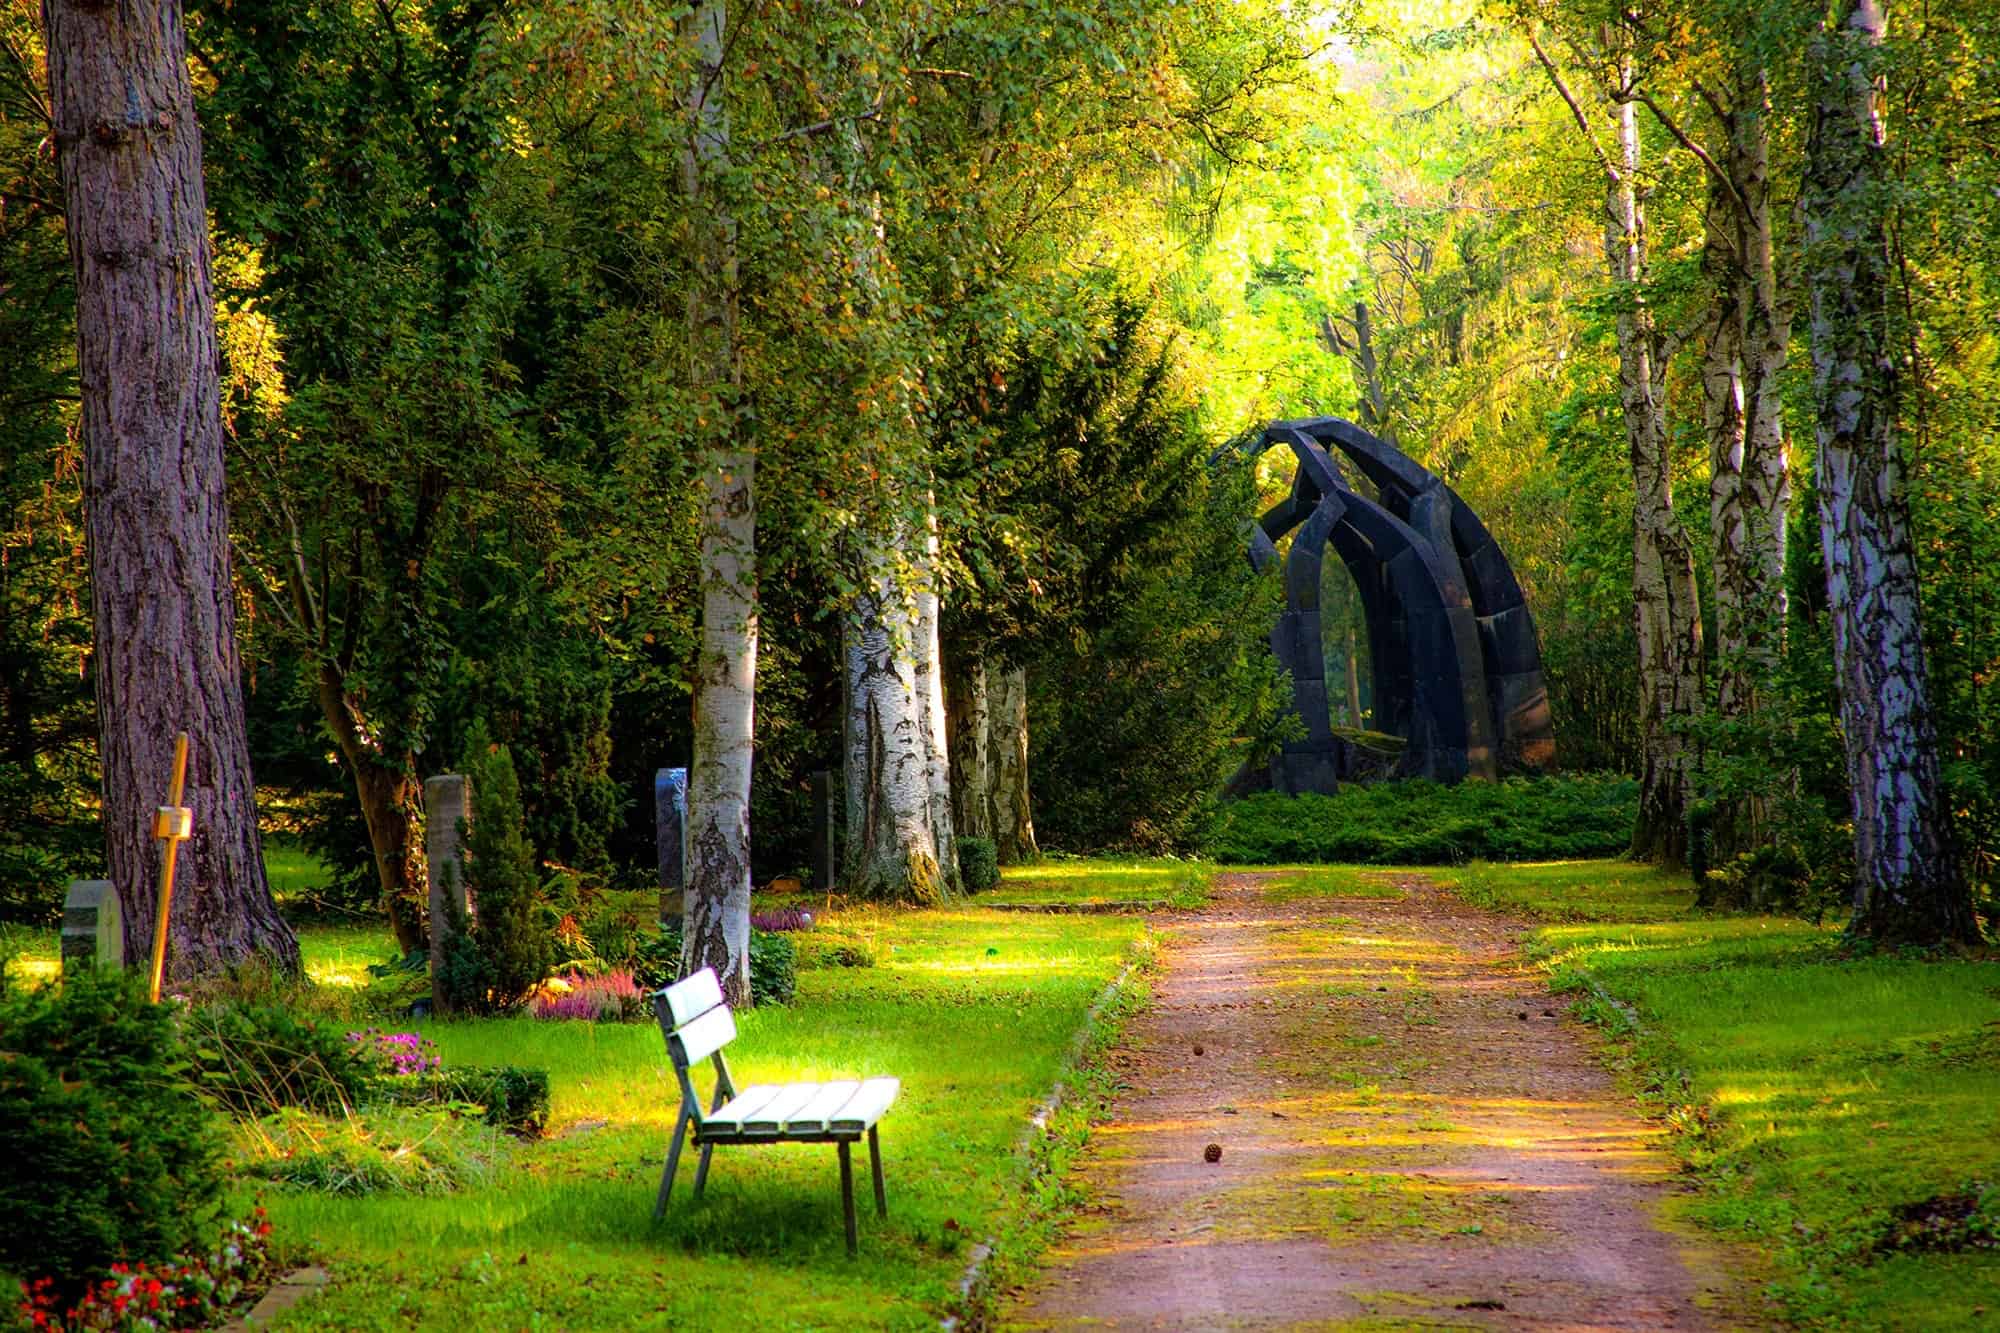 A park with green grass and trees and a bench in the foreground and a large black statue in the background.